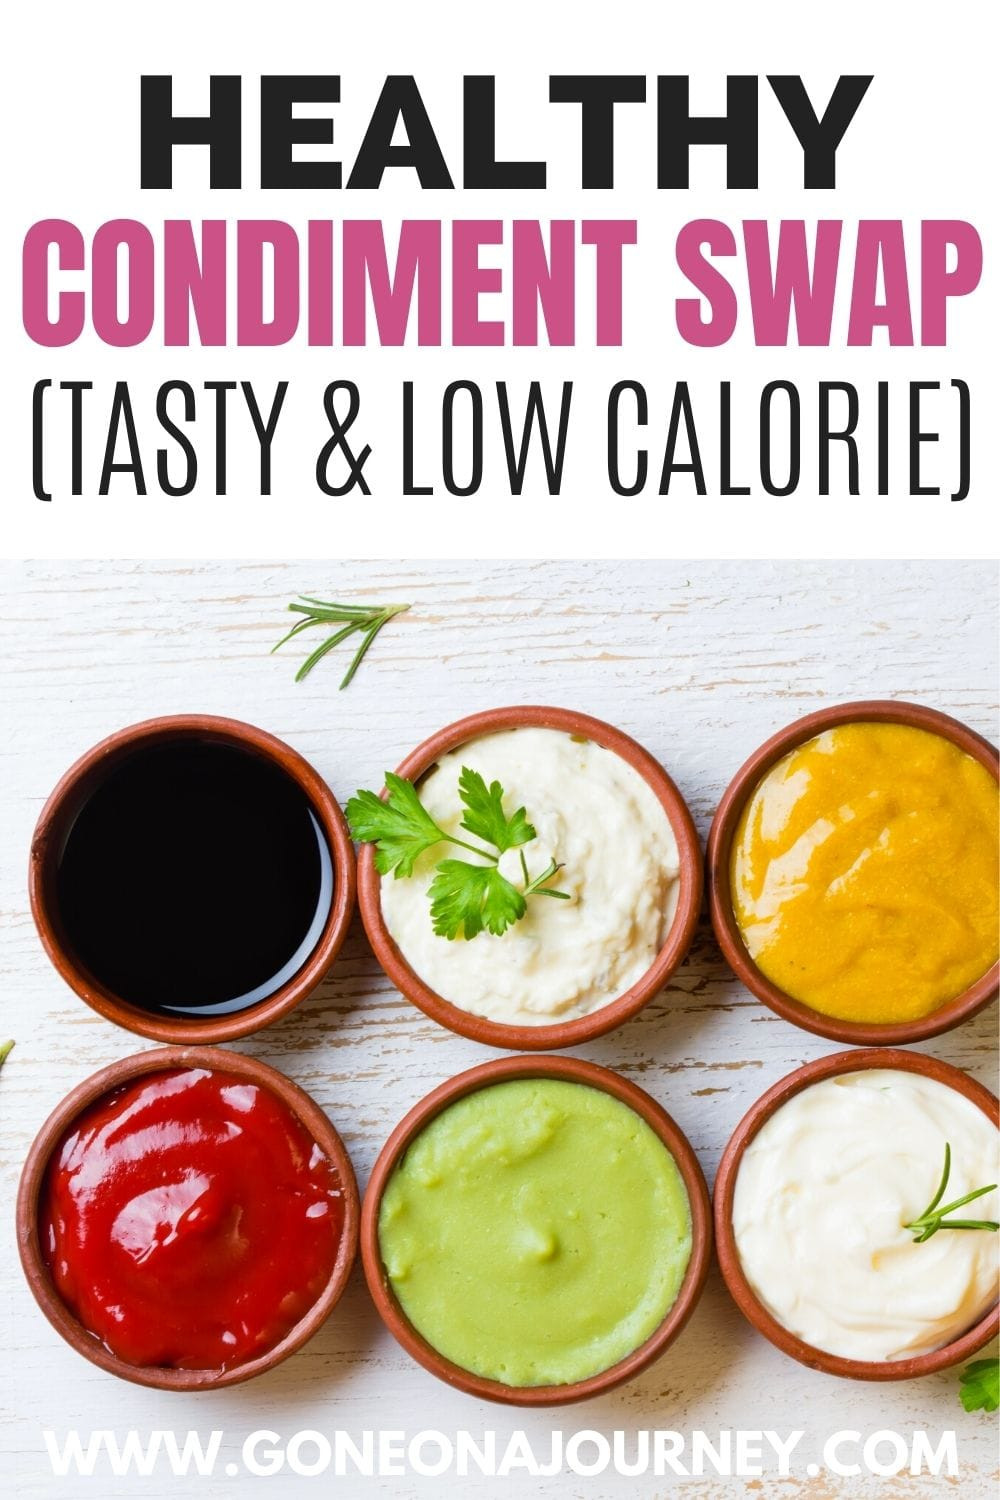 Low Calorie Sauces Luxury 21 Low Calorie Sauces that’ll Bring Life to Your Meals